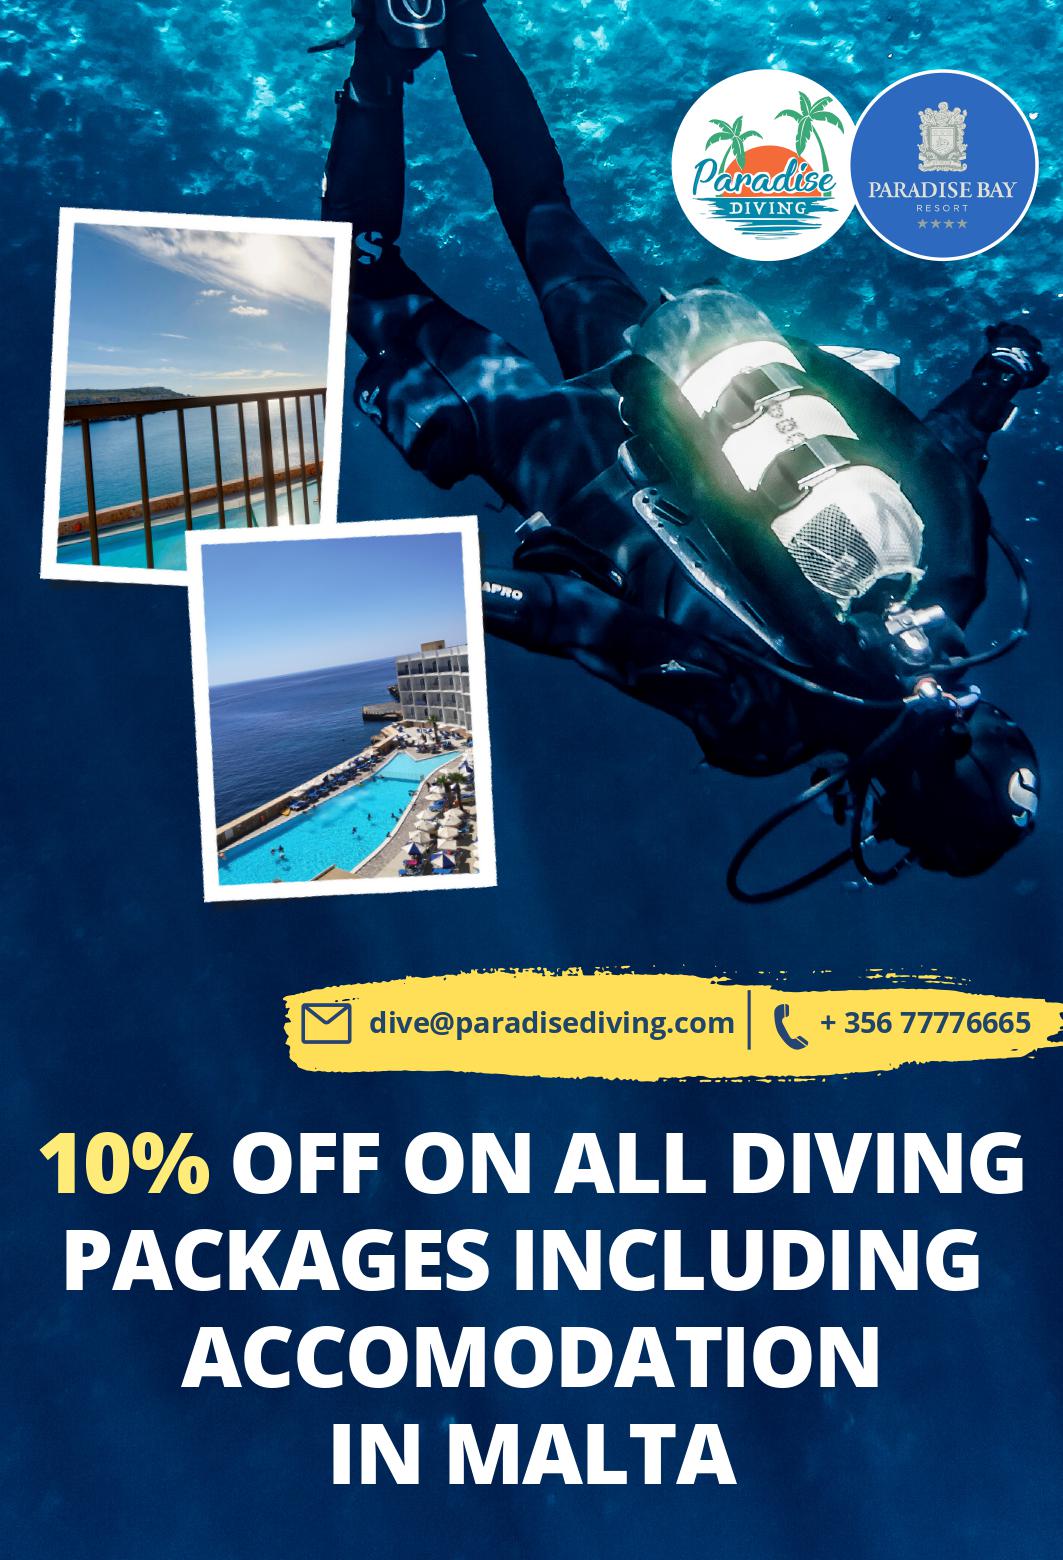 Paradise Diving ad